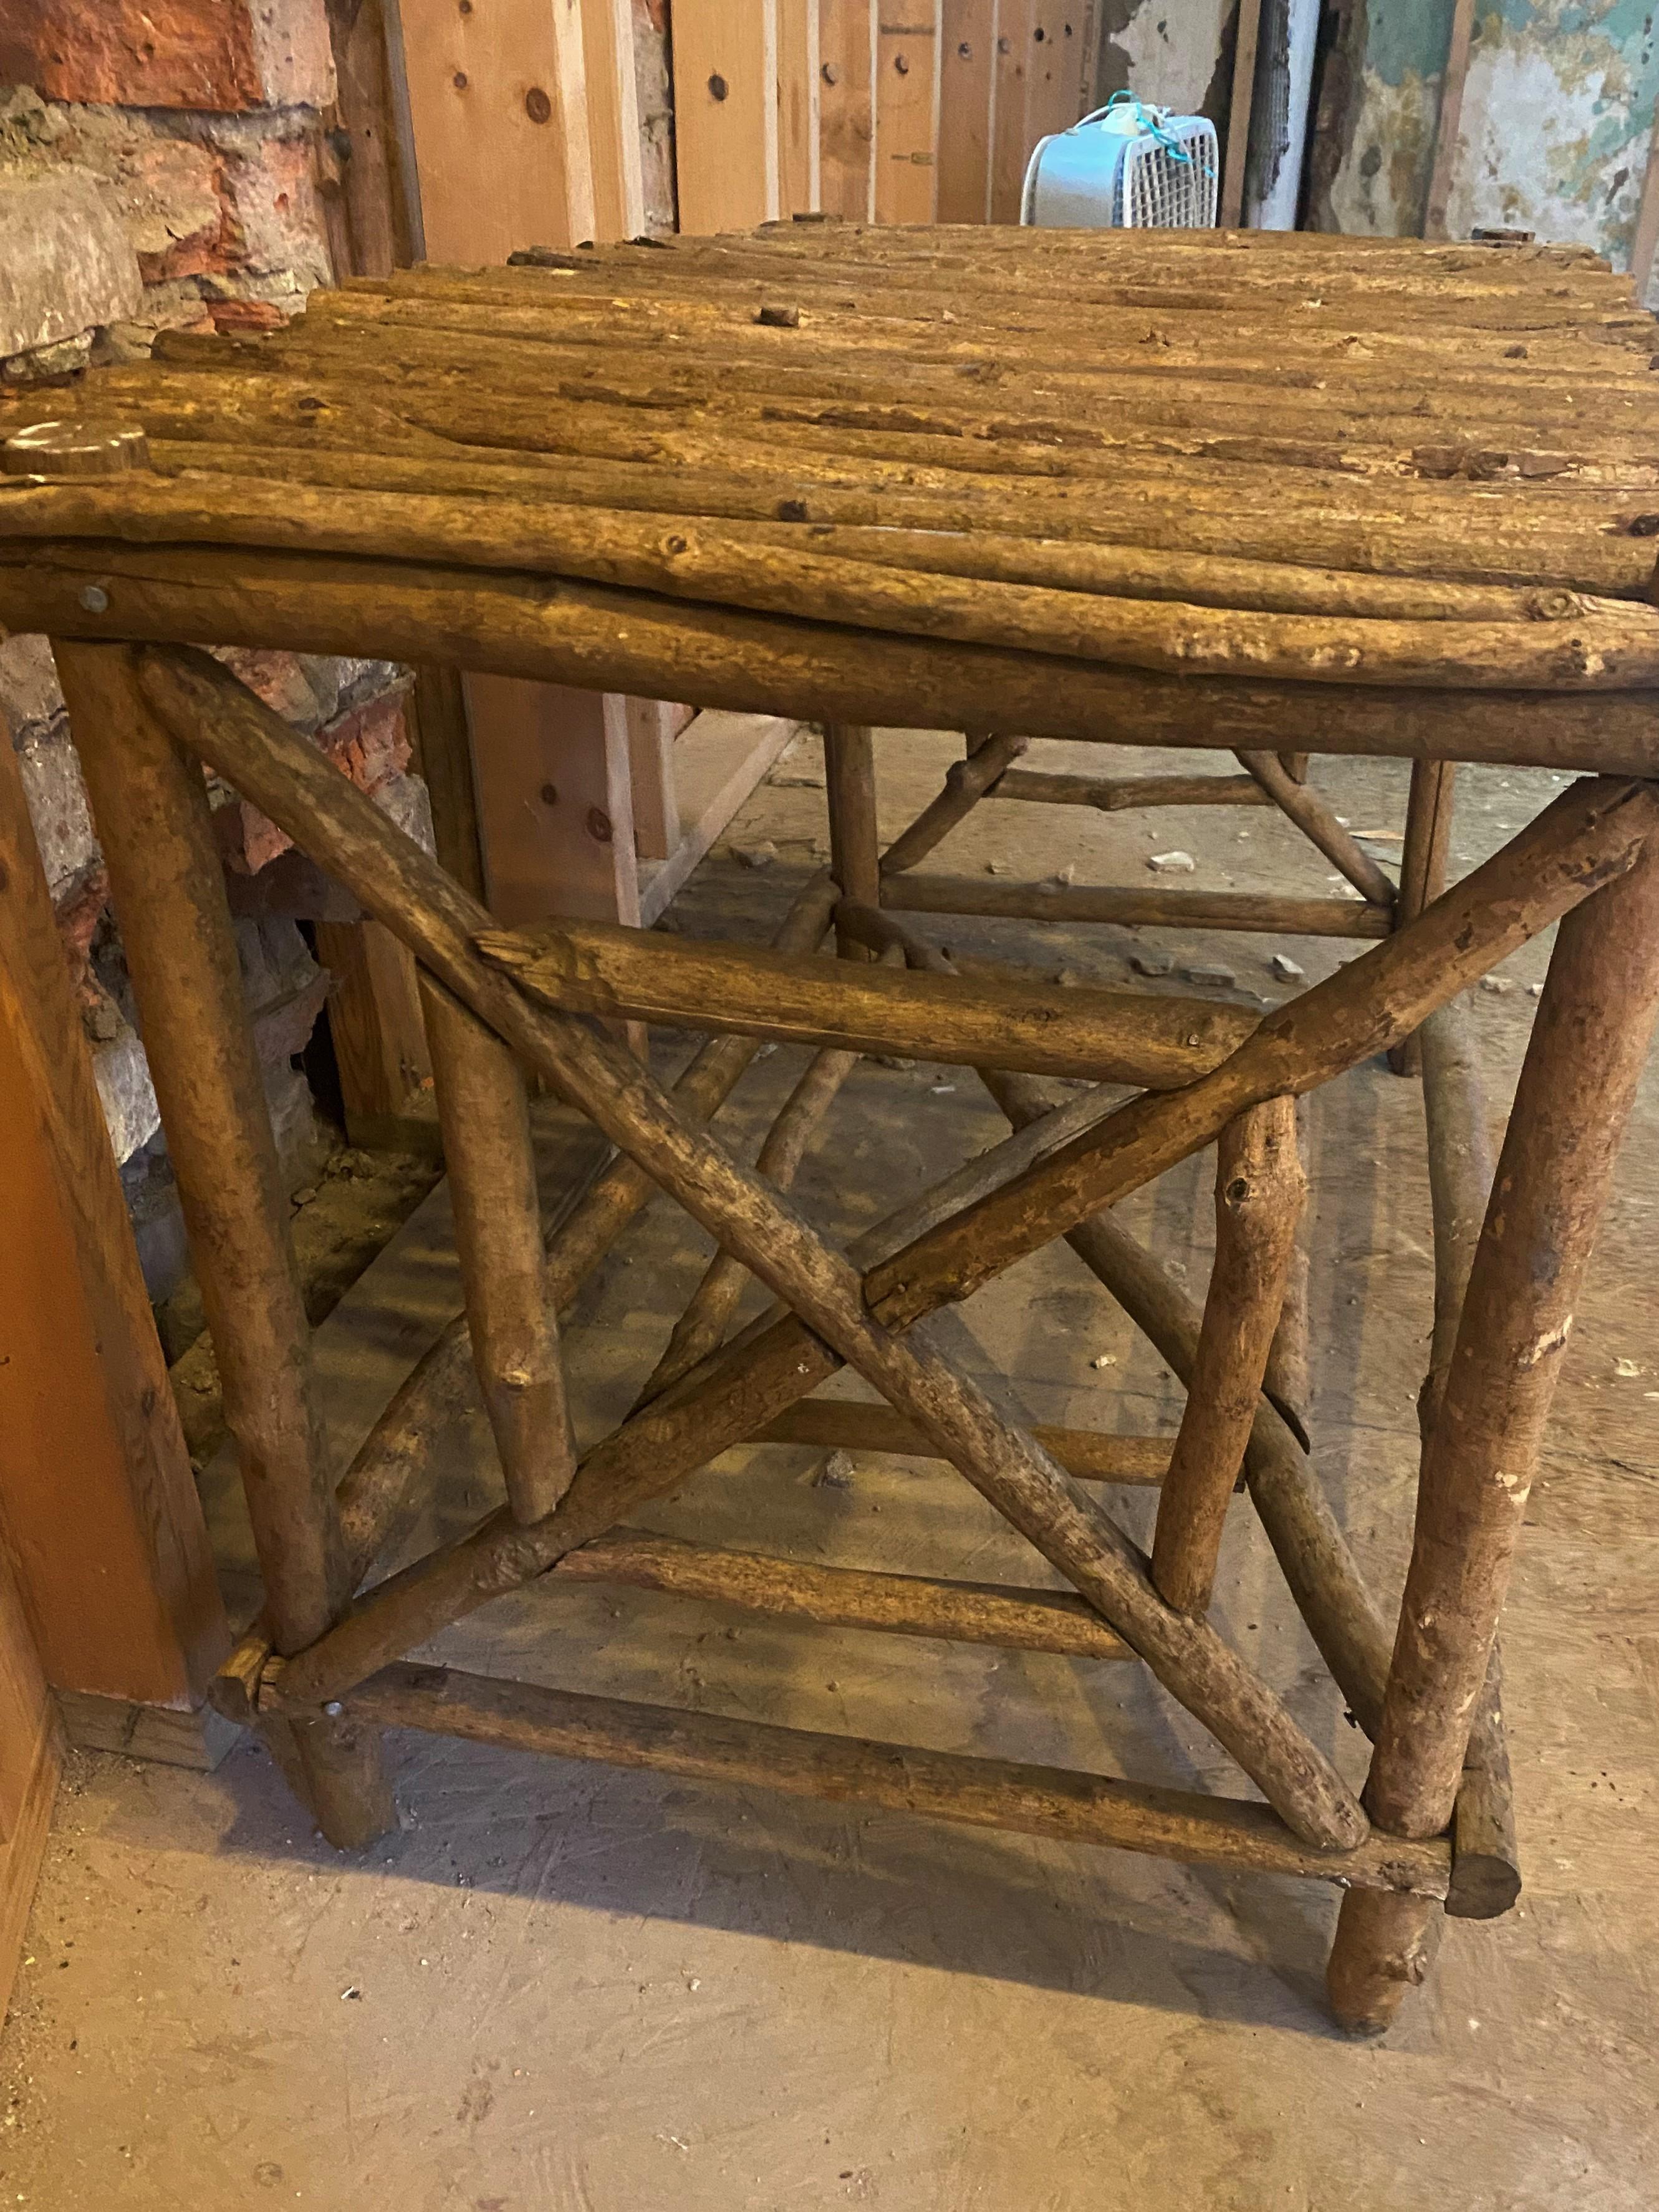 Rustic Adirondack Twig Branch Stand Cabin Console Coffee Table In Good Condition For Sale In Clifton Forge, VA